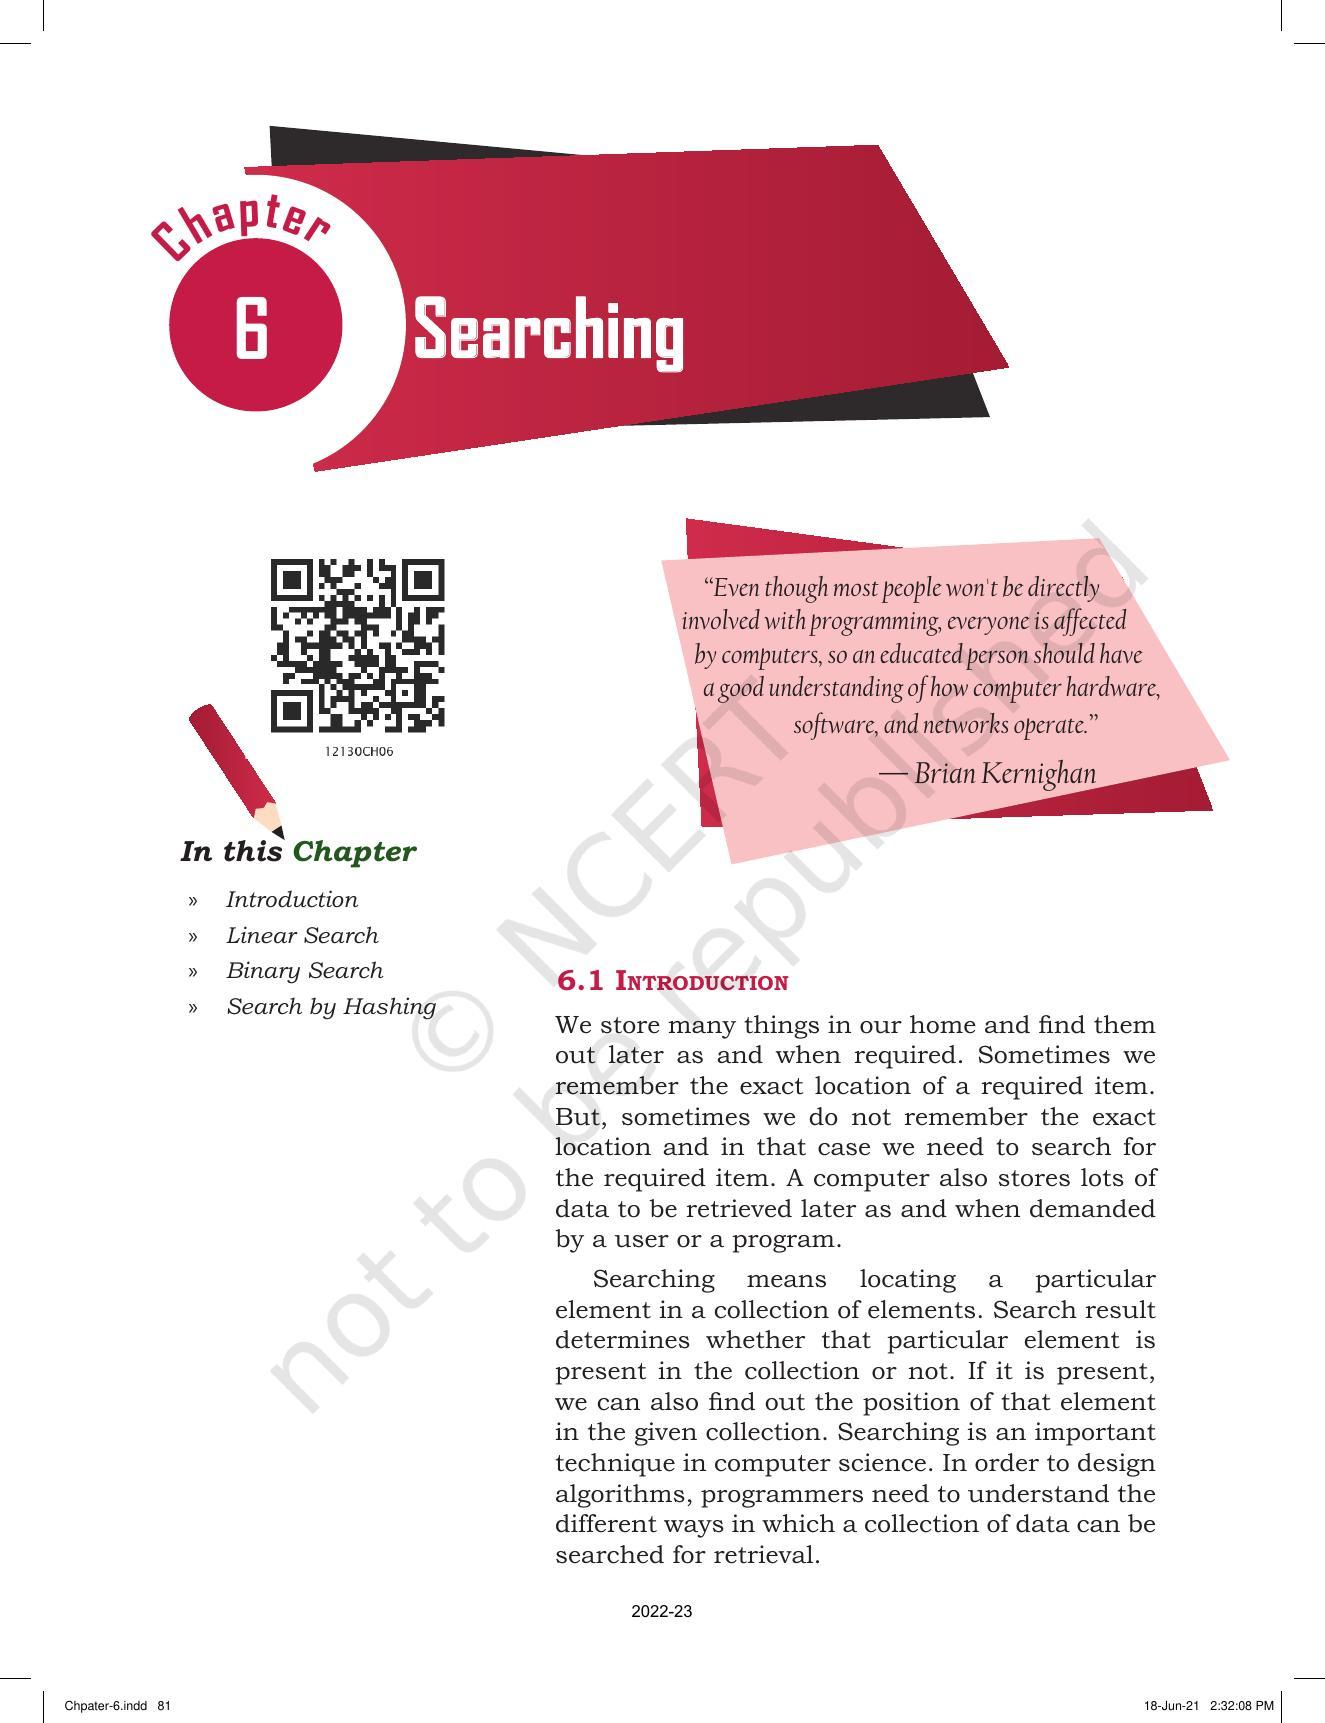 NCERT Book for Class 12 Computer Science Chapter 6 Searching - Page 1